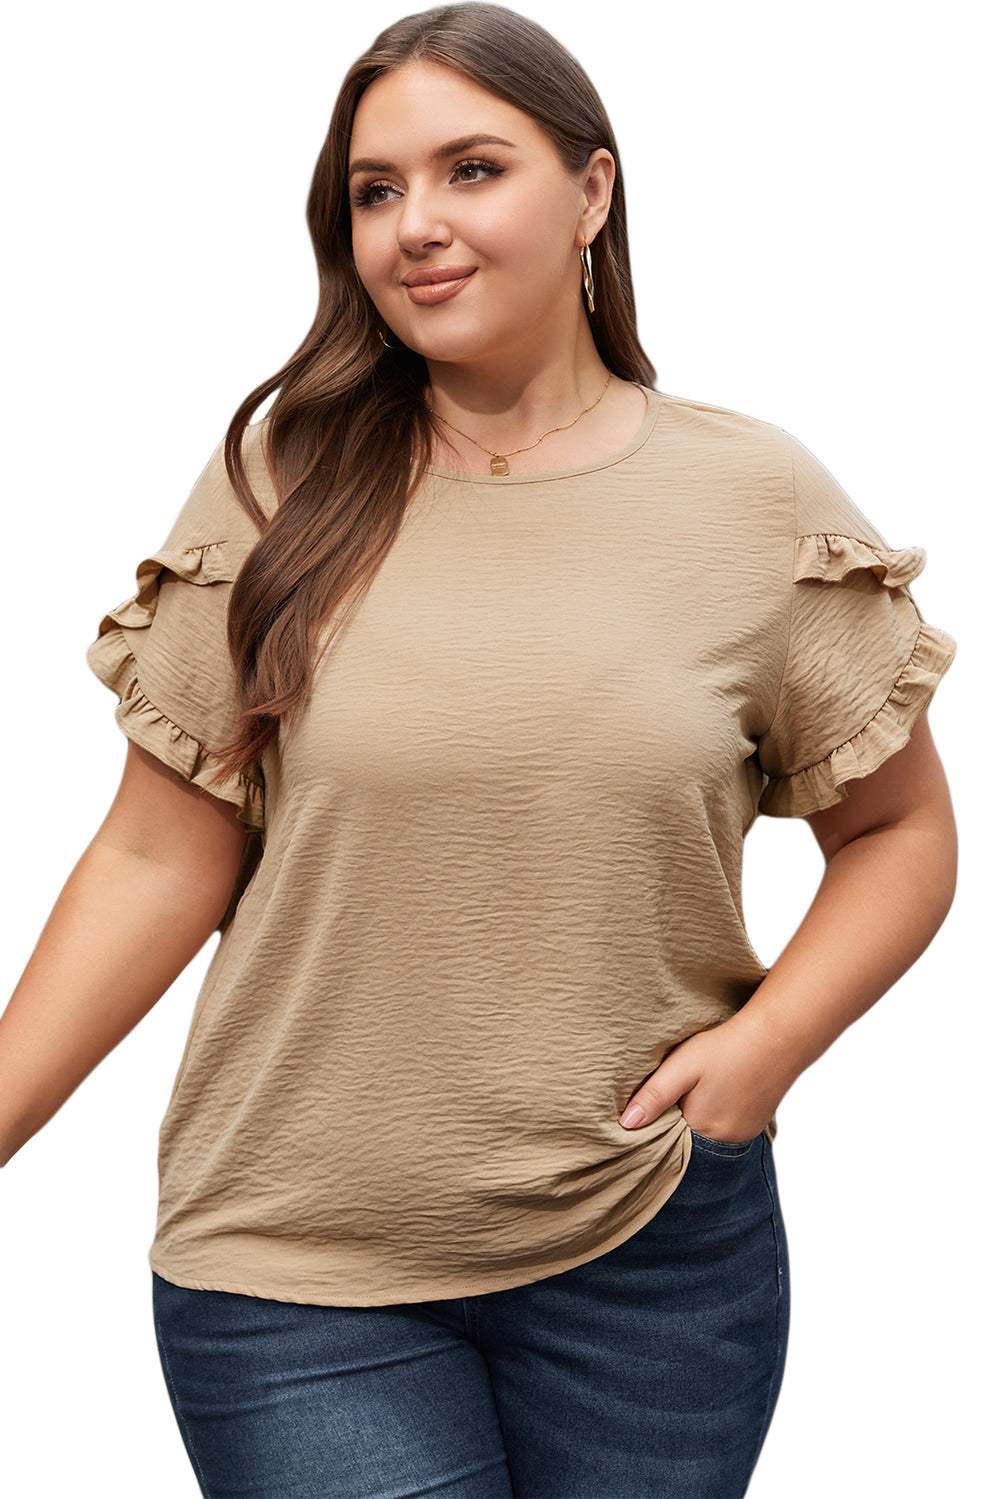 Light French Beige Ruffled Short Sleeve Plus Size Top - Stylish & Comfortable for Everyday Wear